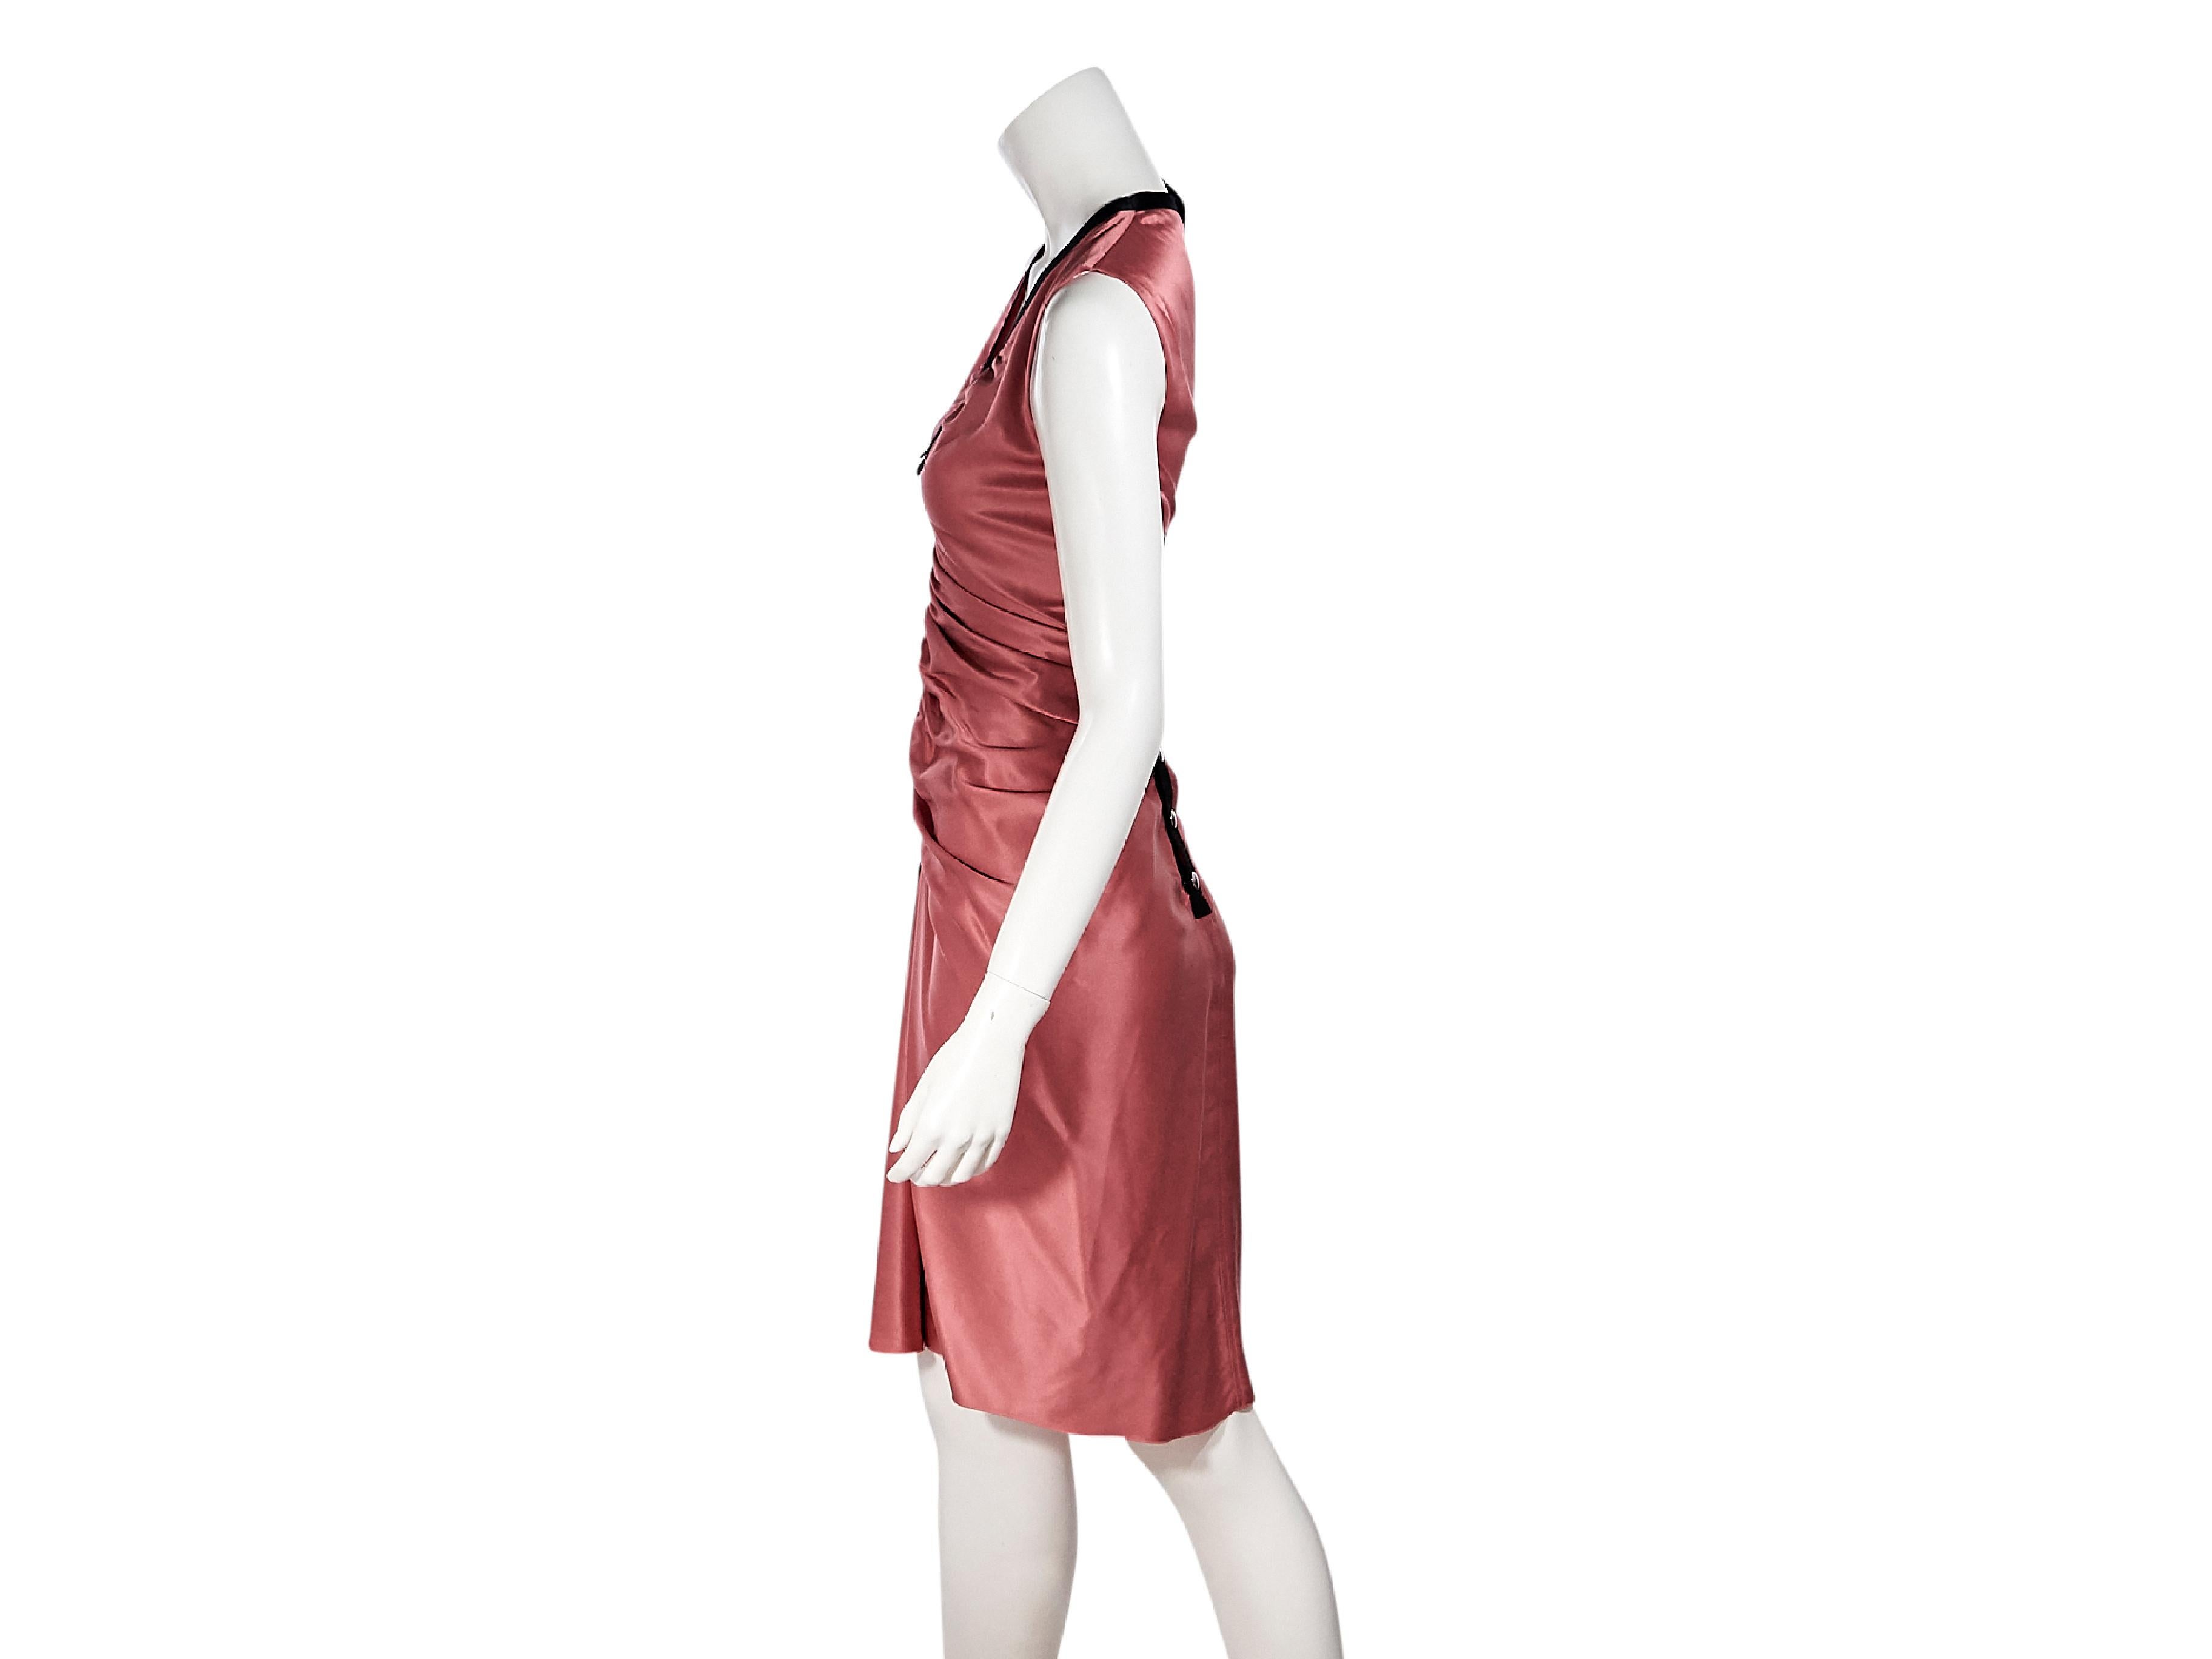 Product details:  Pink silk dress by Lanvin.  Ruched front design creates a flattering silhouette.  V-neck.  Sleeveless.  Button back closure.  31